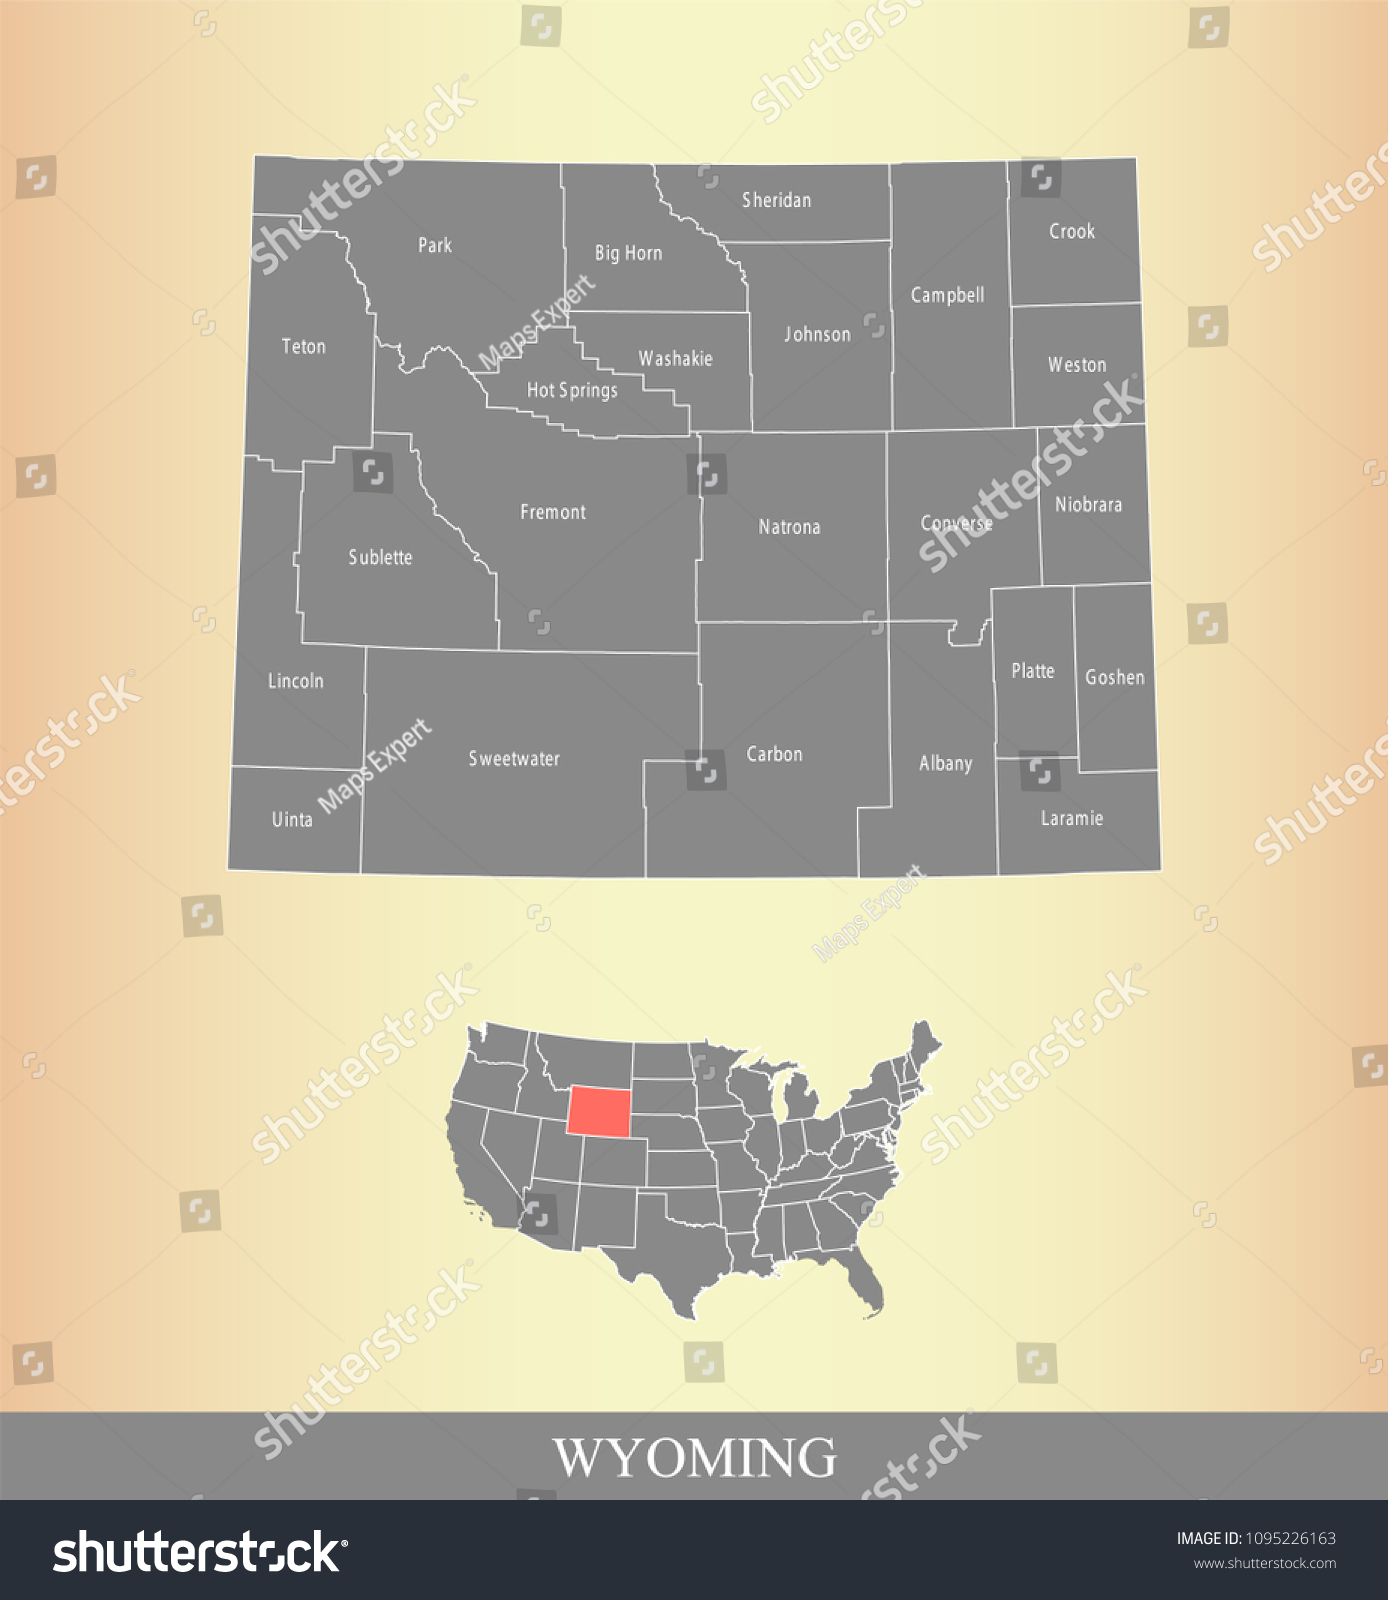 Wyoming County Map With Names Labeled Wyoming Royalty Free Stock Vector 1095226163 0379